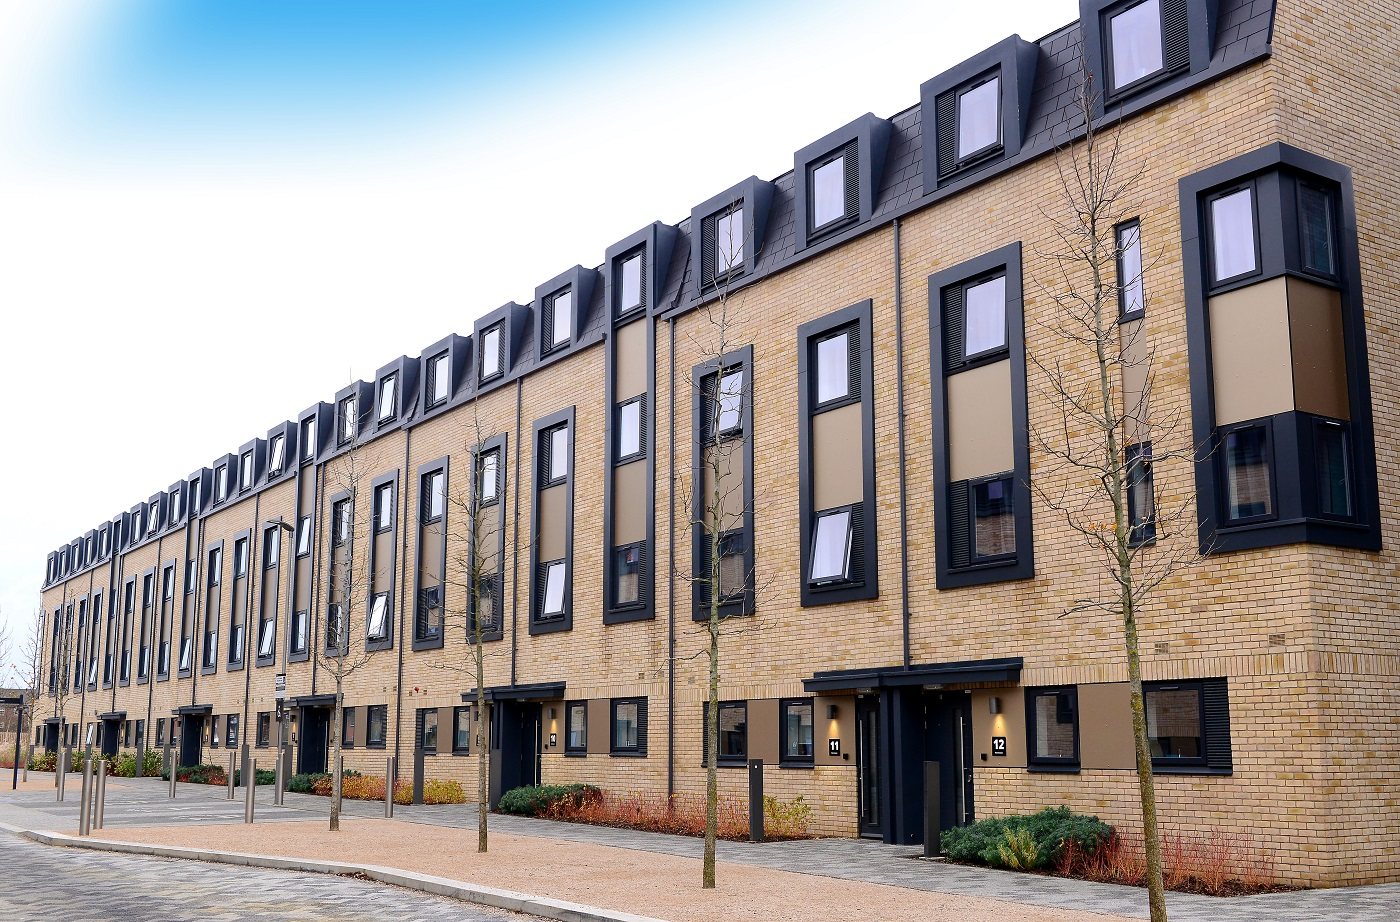 Row of town houses at Waterside campus